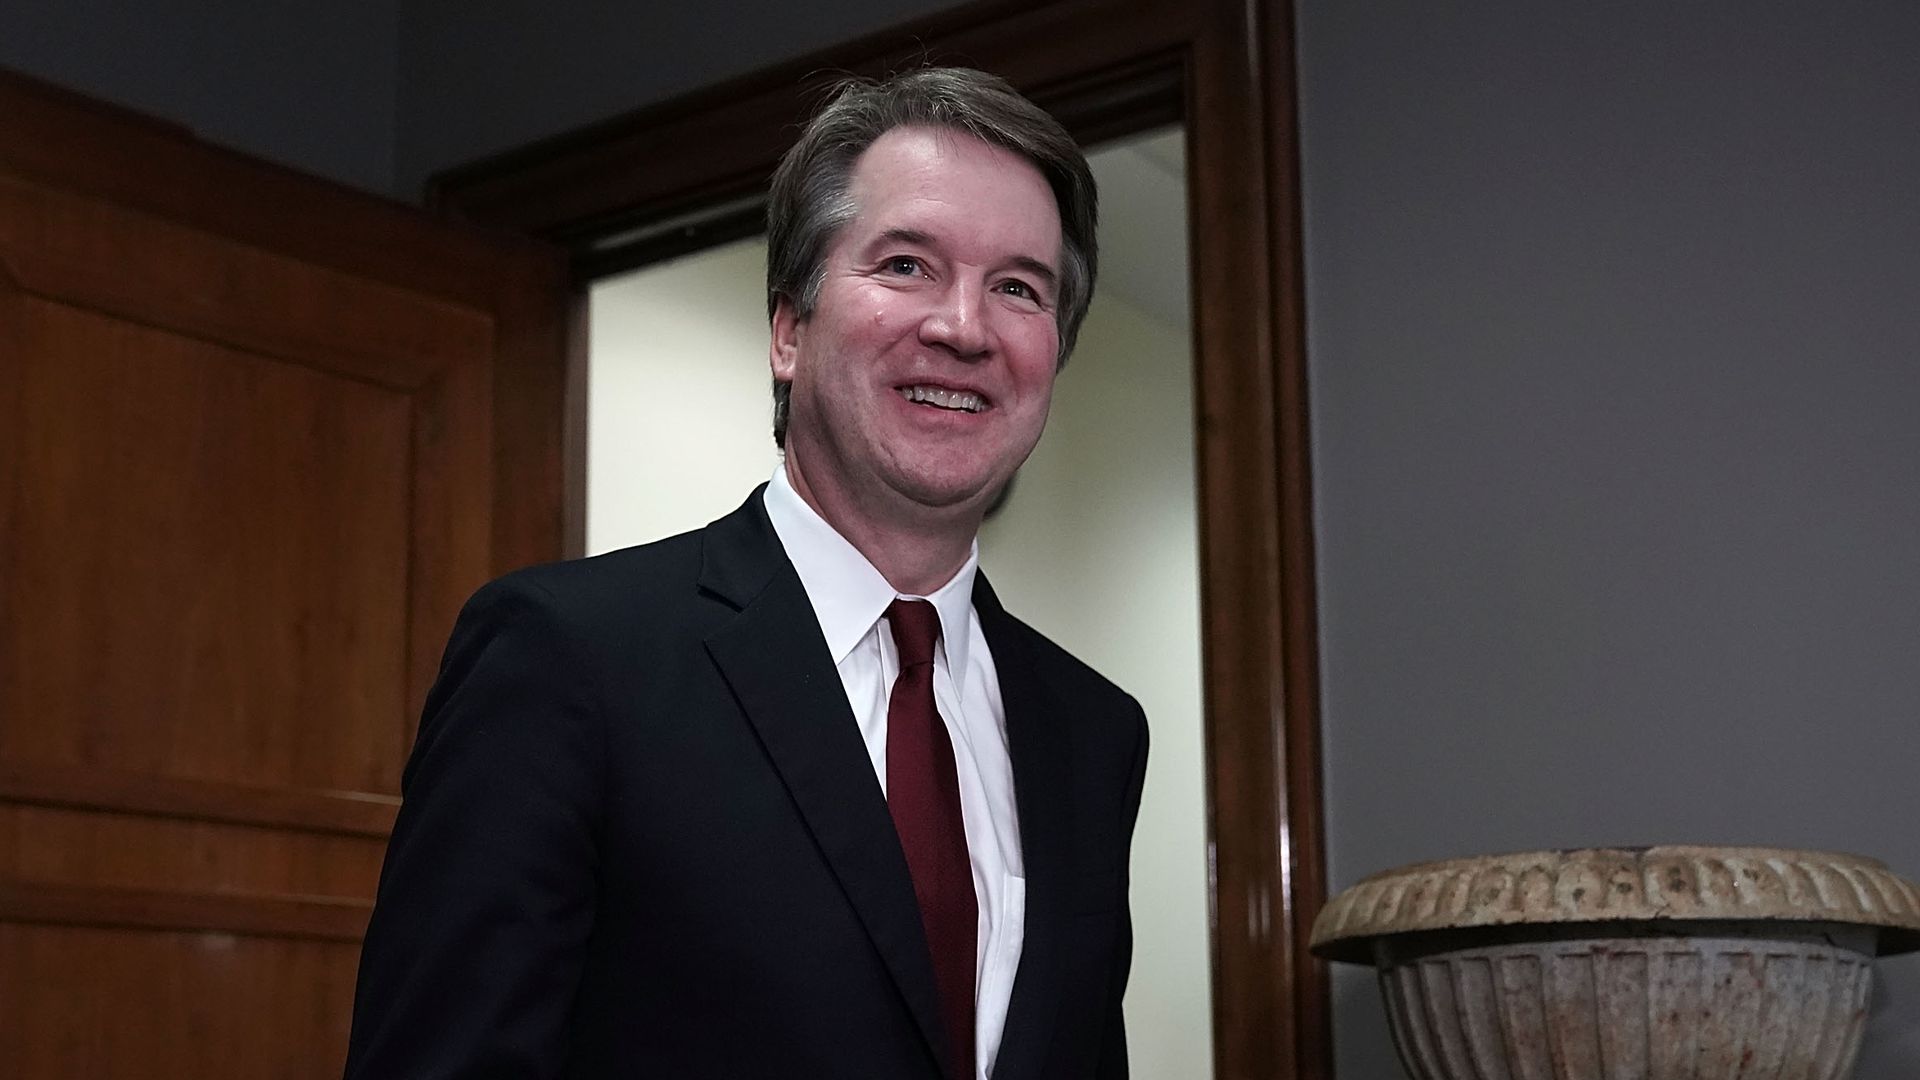 Brett Kavanaugh walks into a room on the Hill with a big grin on his face